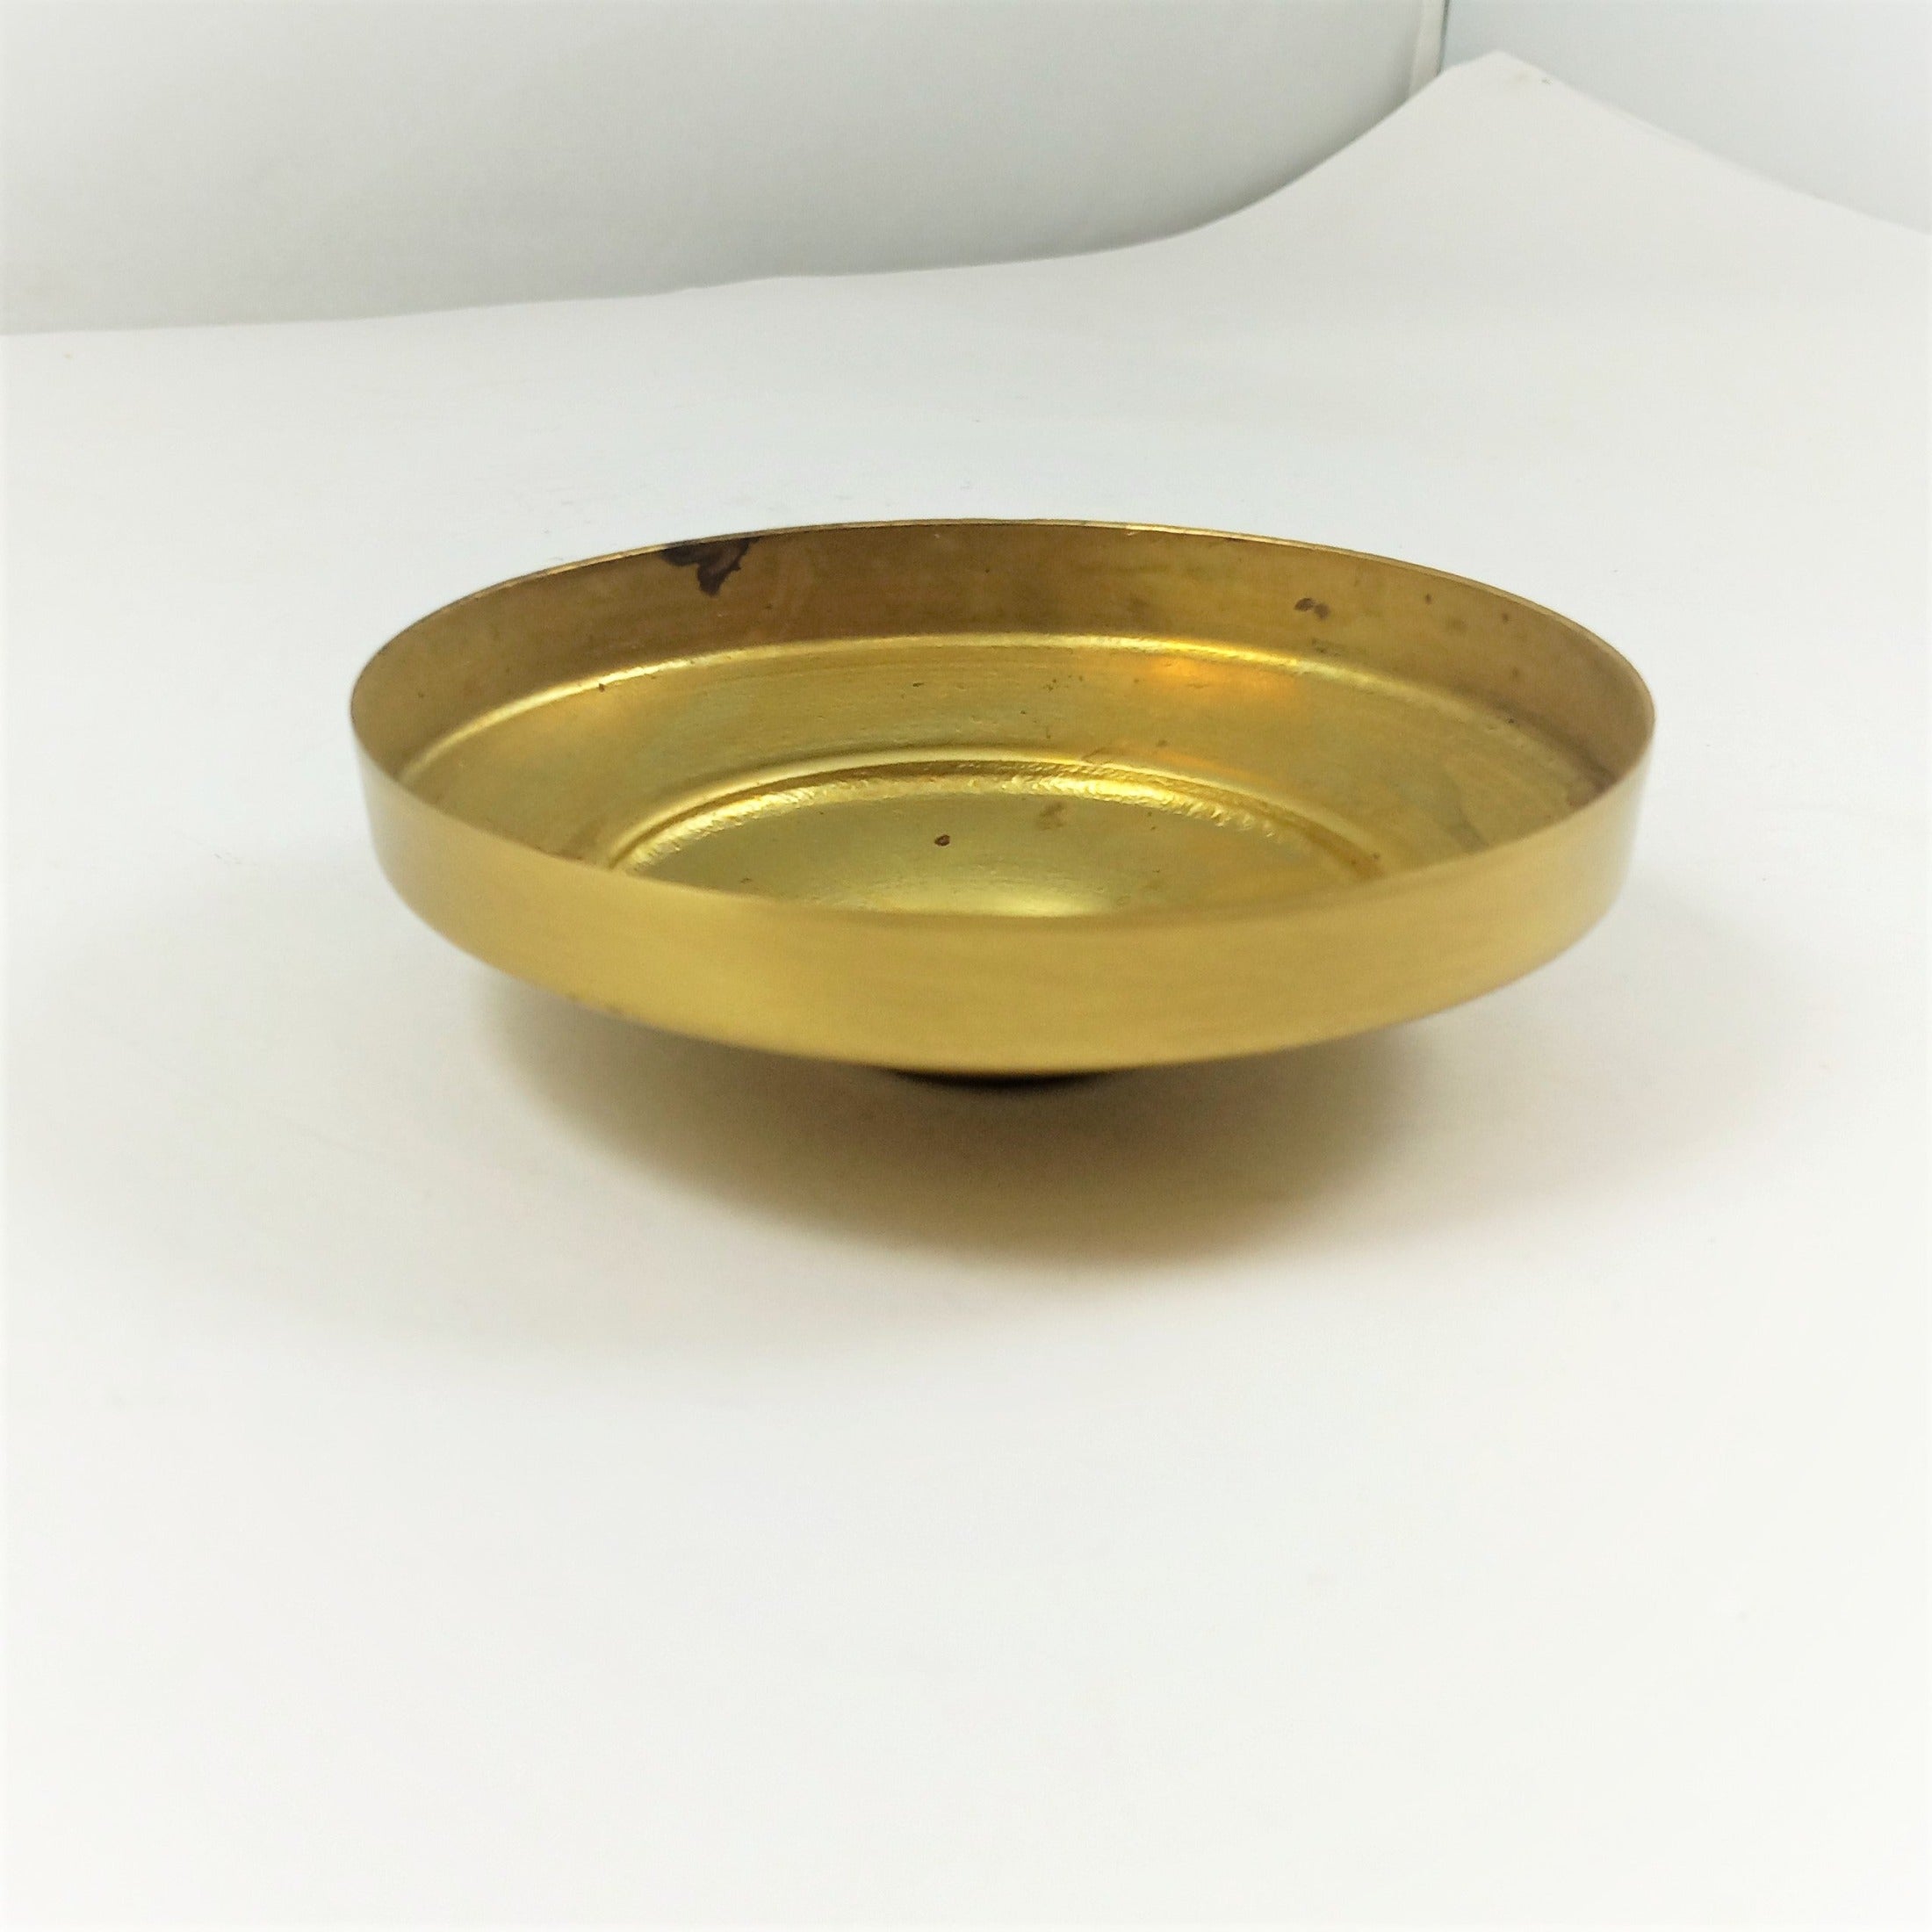 2-1/4" Brushed & Lacquered Deep Brass Cap with 1/2" Edge